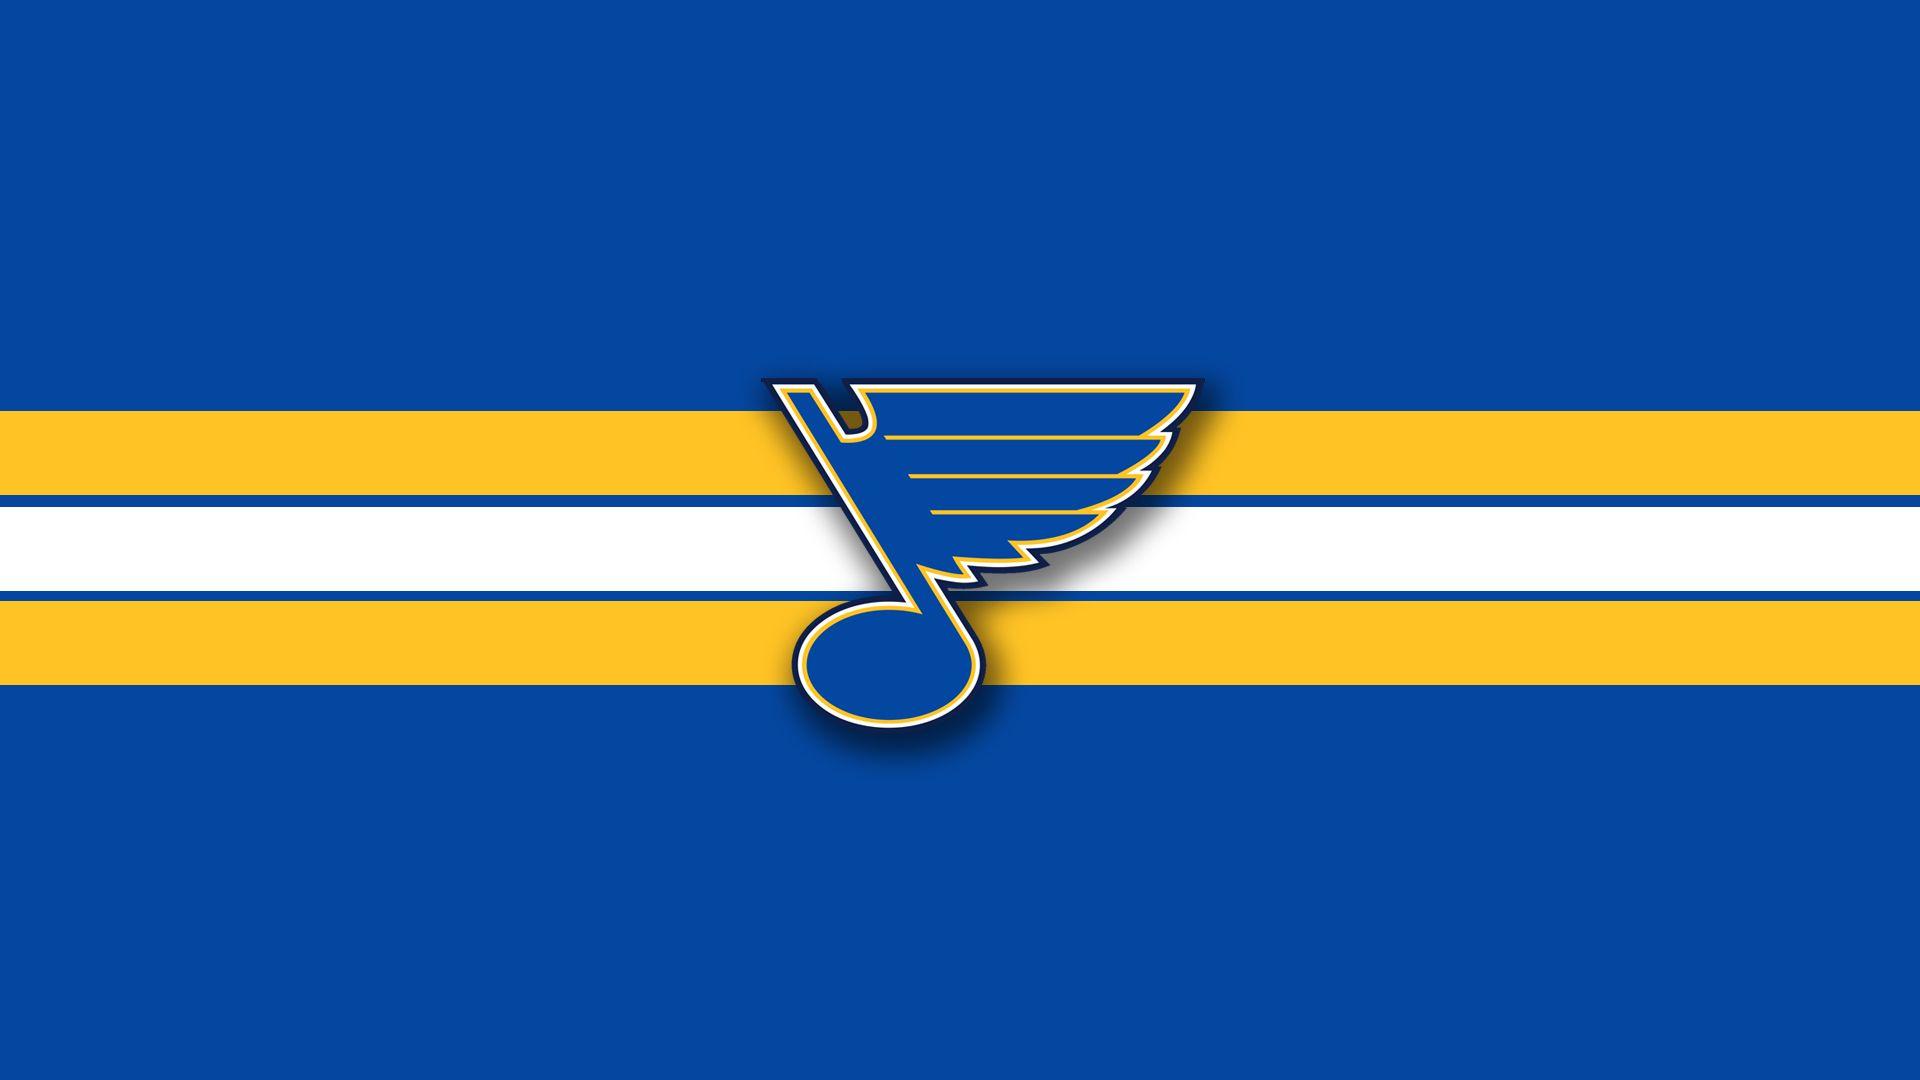 STL Blues Logo - 7 Reasons It's Acceptable to Hate the St. Louis Blues